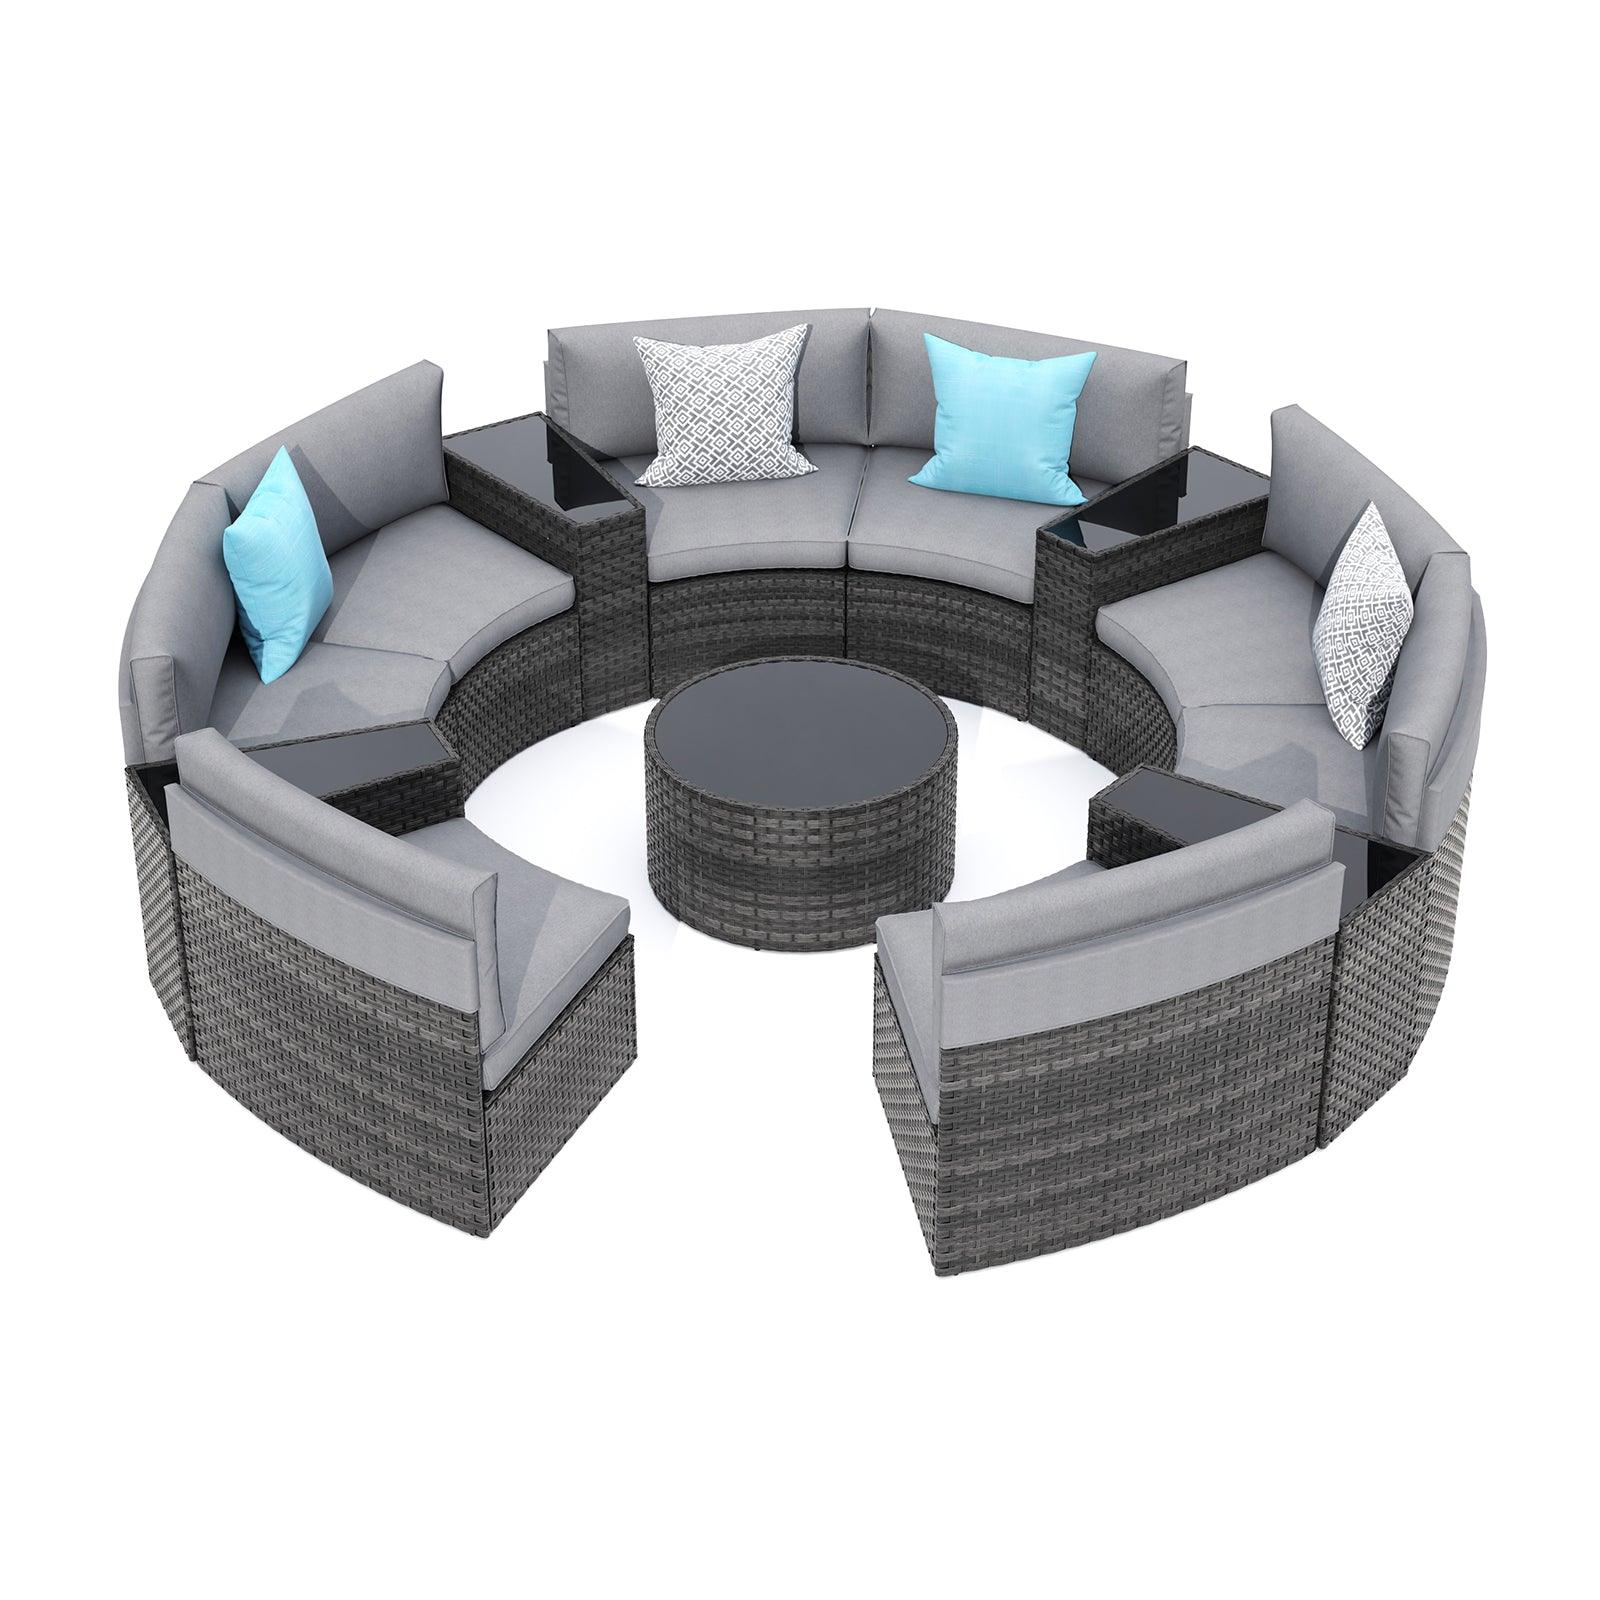 Halo IV 13-pc. Outdoor Curved Sectionals, Outdoor Half-Moon Sectional Set, Grey sale 